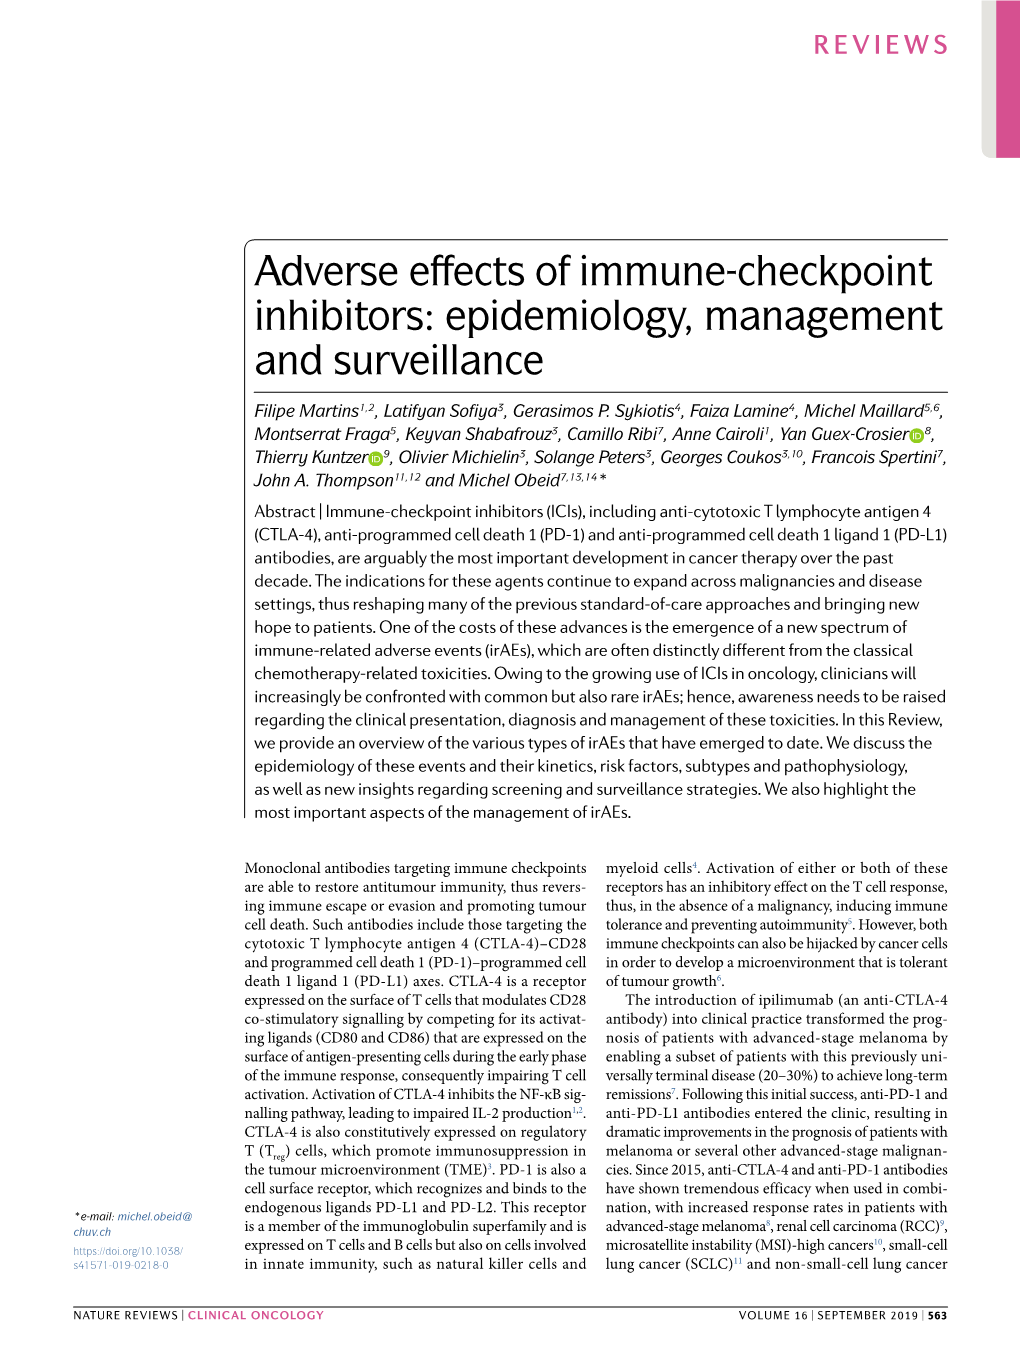 Adverse Effects of Immune-Checkpoint Inhibitors